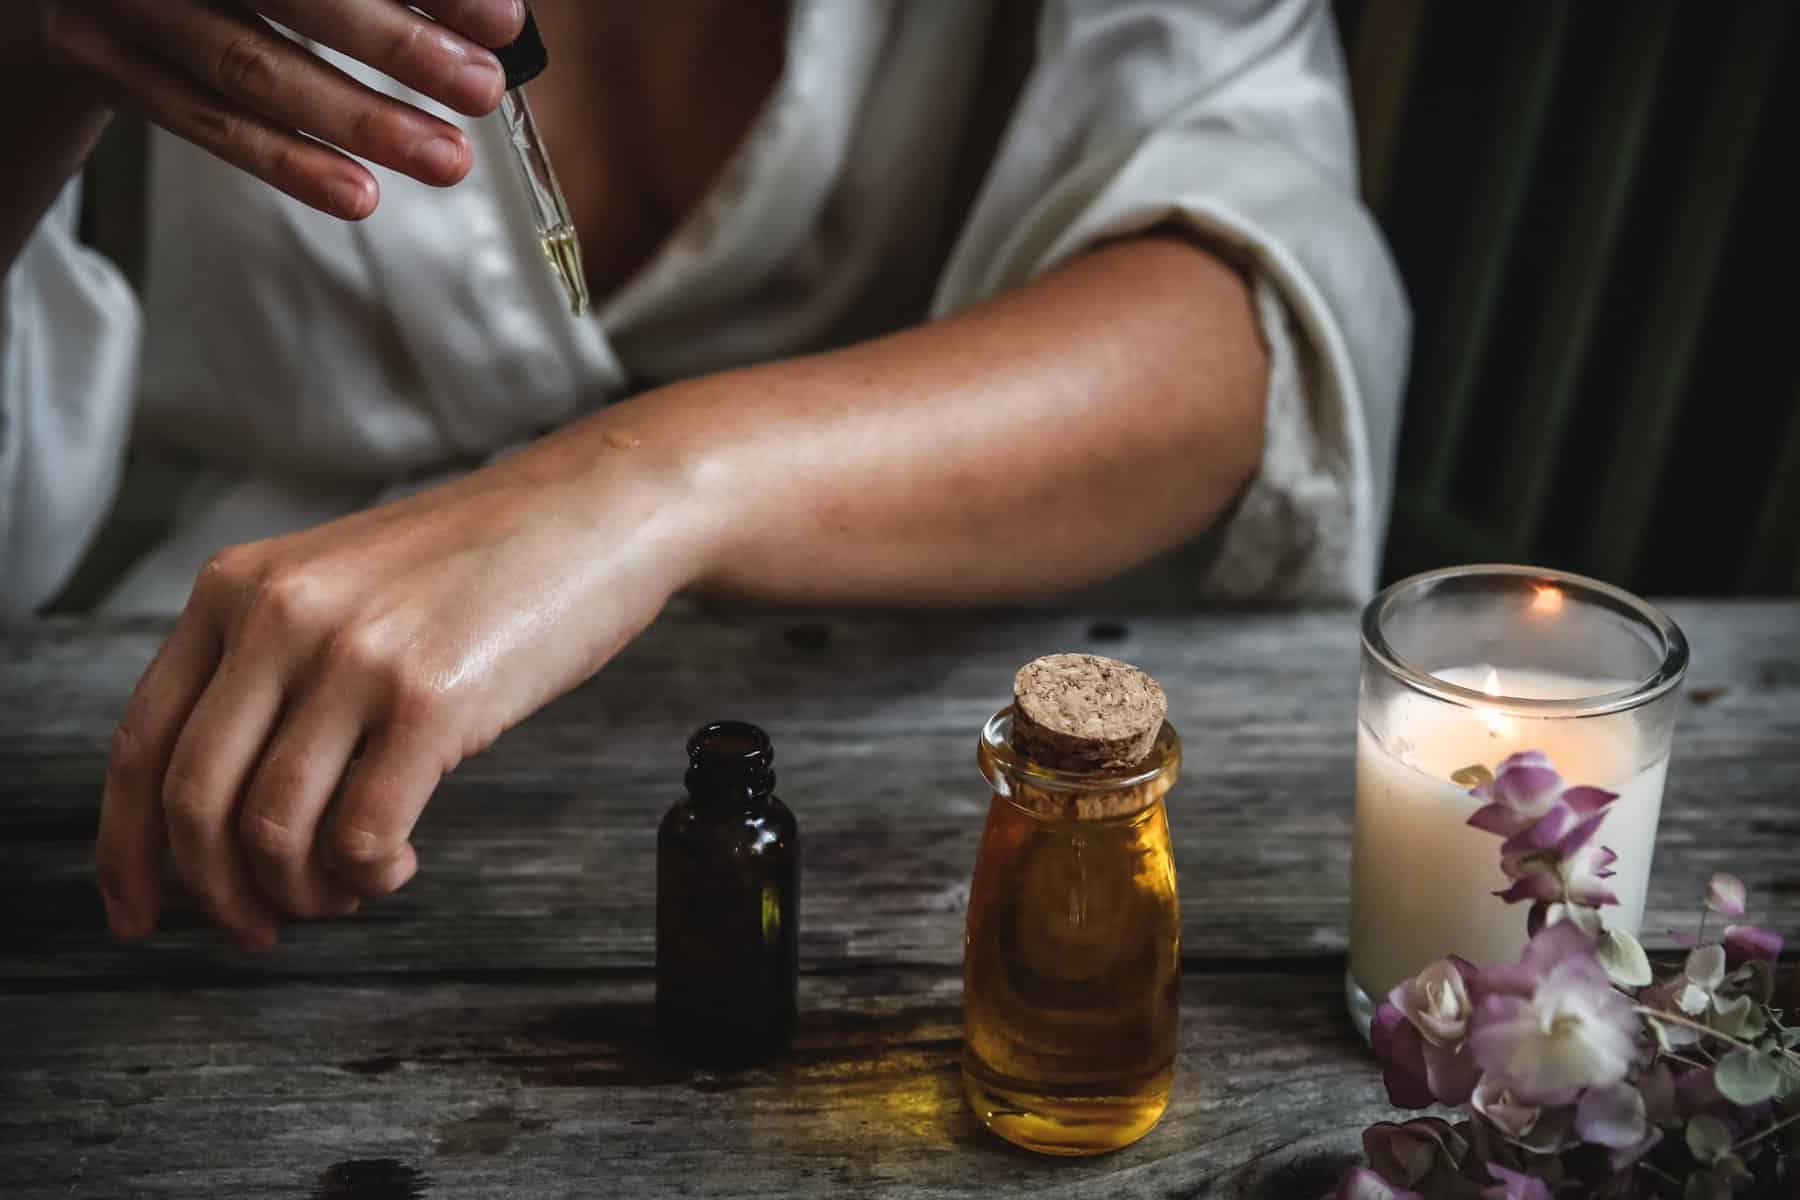 Woman placing oil onto her skin with a dropper with a candle lit next to her